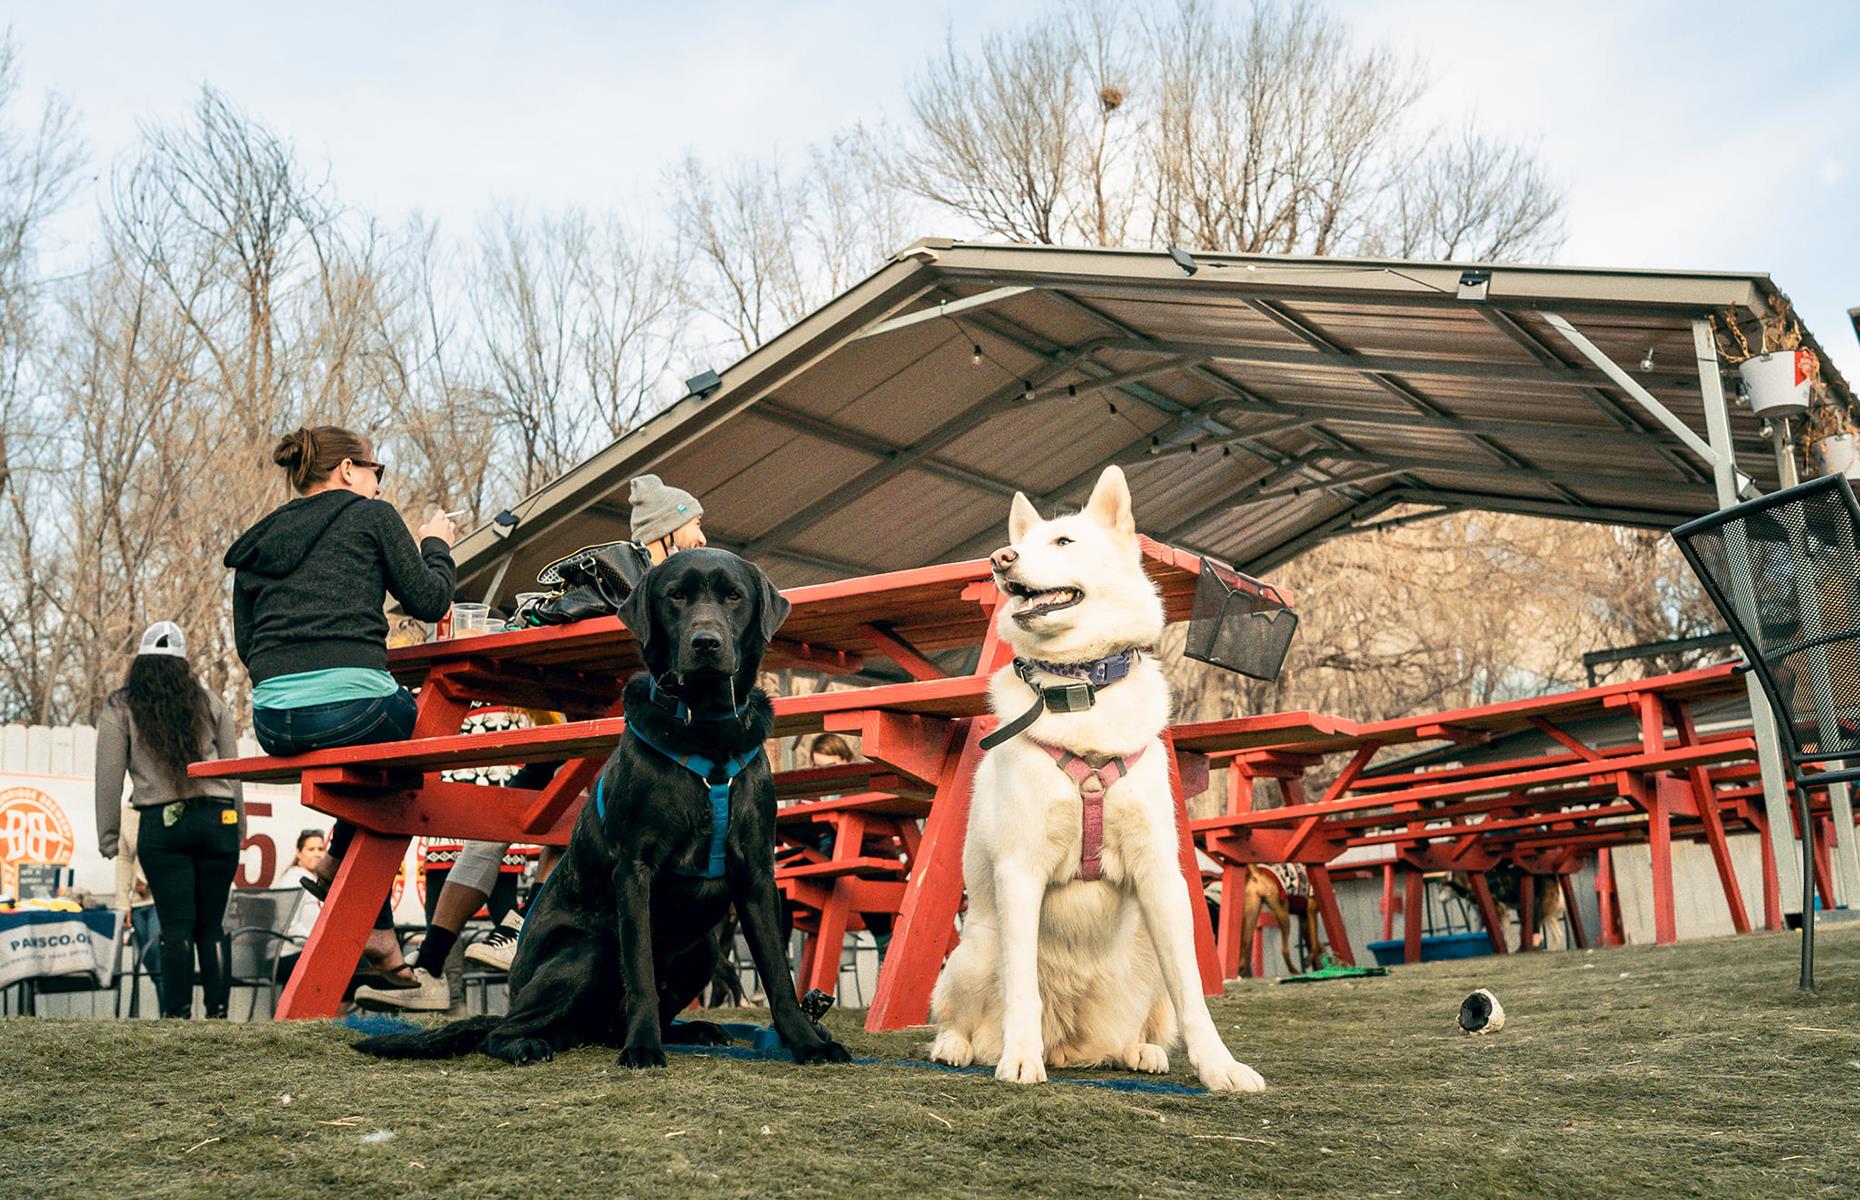 <p>Restaurants don't come much more dog-friendly than <a href="https://www.yelp.com/biz/watering-bowl-denver">this favorite spot in Denver</a>. Part dog park, part restaurant, <a href="https://denverwateringbowl.com">The Watering Bowl</a> has a huge outdoor patio area for your pups to roam off leash while you imbibe. Expect chicken wings with zingy dressings such as sriracha or teriyaki pineapple, mammoth burgers and tacos on the menu as well as plenty of Colorado beers to taste. They hold dog parties and special events and proceeds from their branded dog tags go to a dog rescue charity.</p>